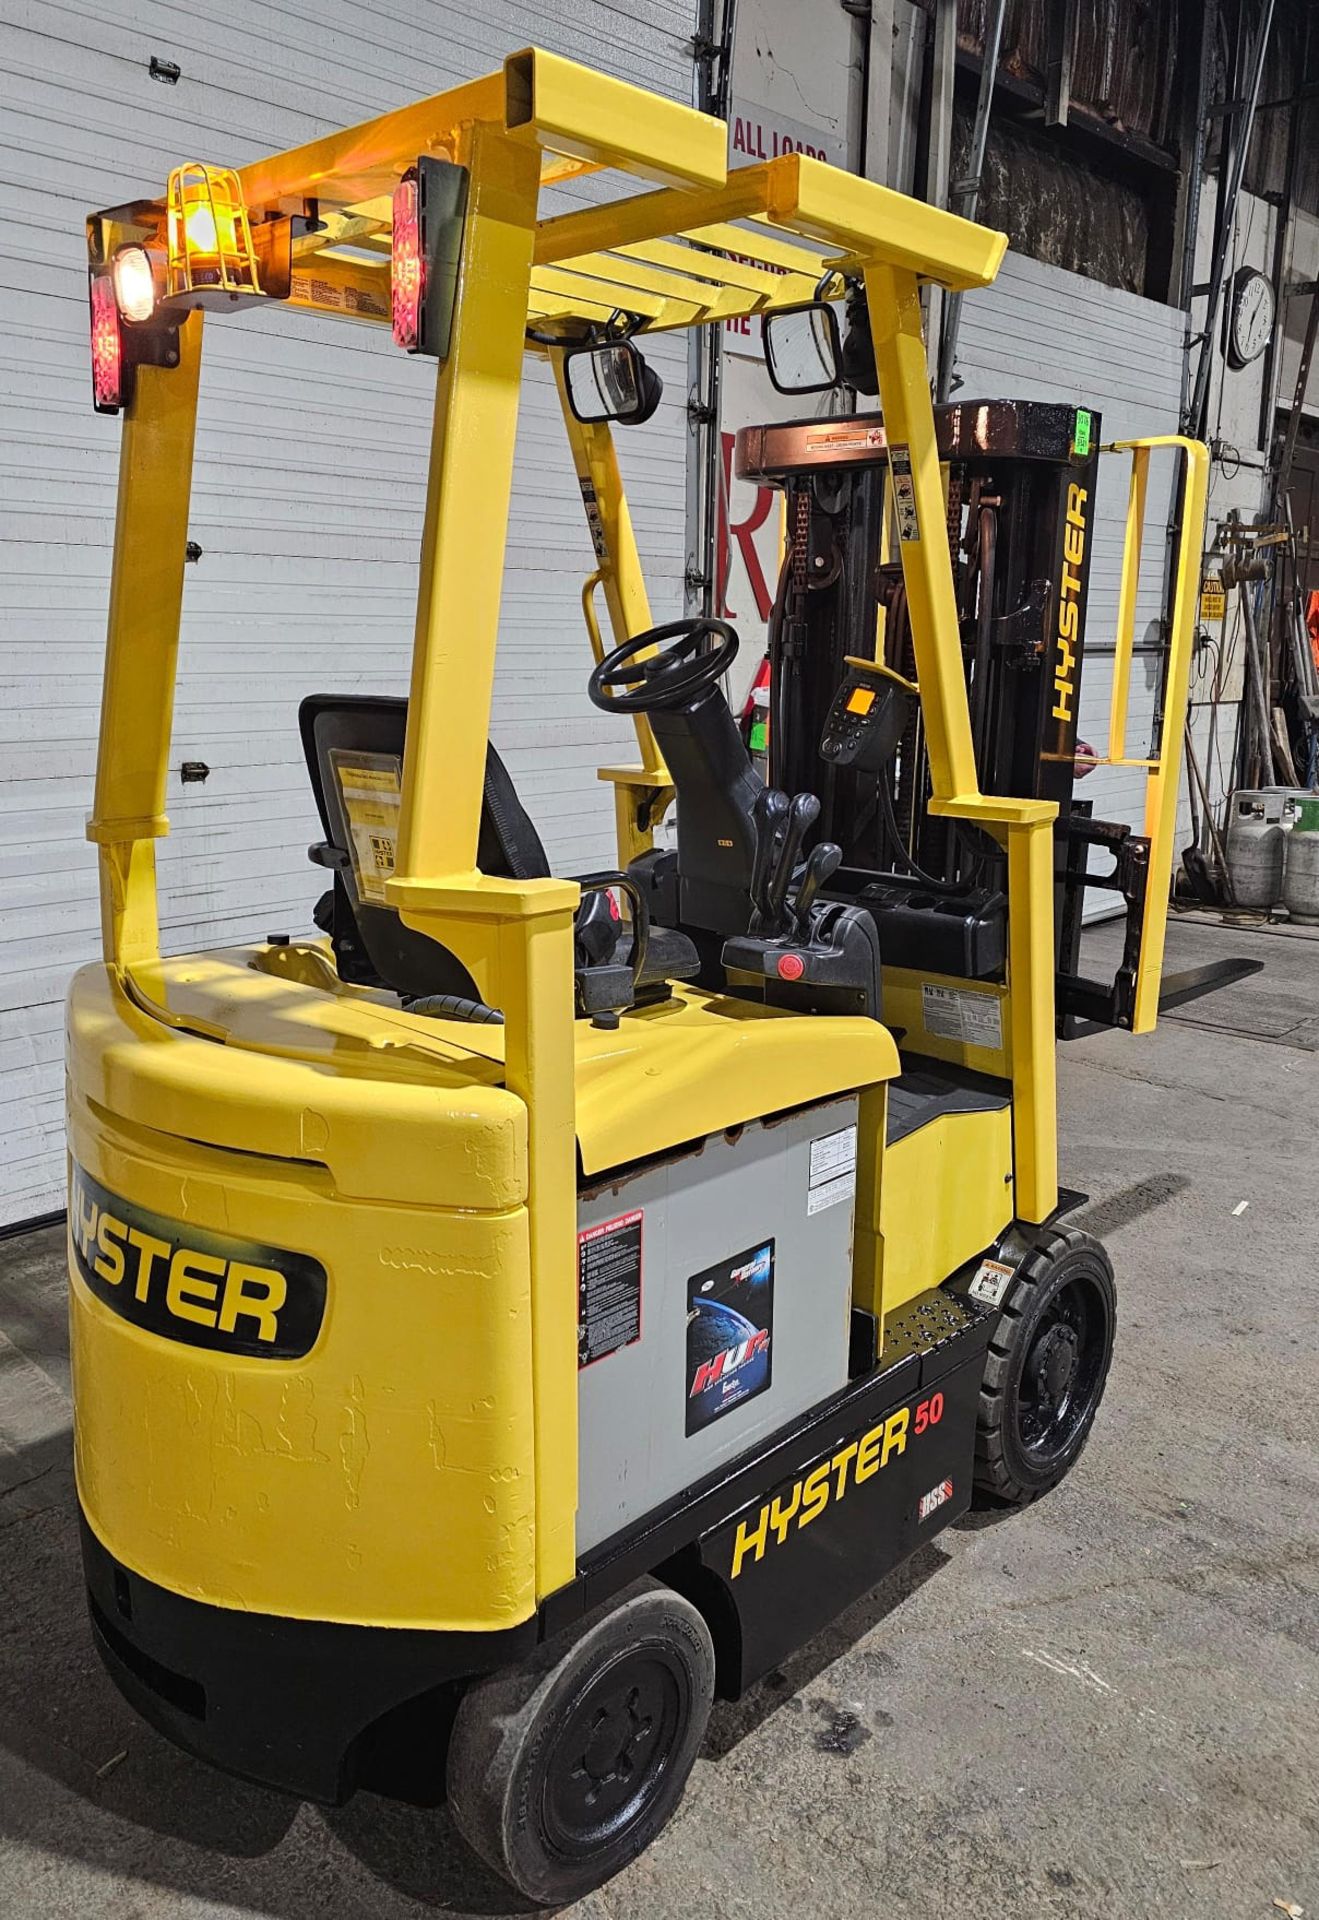 2014 Hyster 5,000lbs Capacity Electric Forklift 36V with sideshift 3-STAGE MAST 189" load height - Image 3 of 6